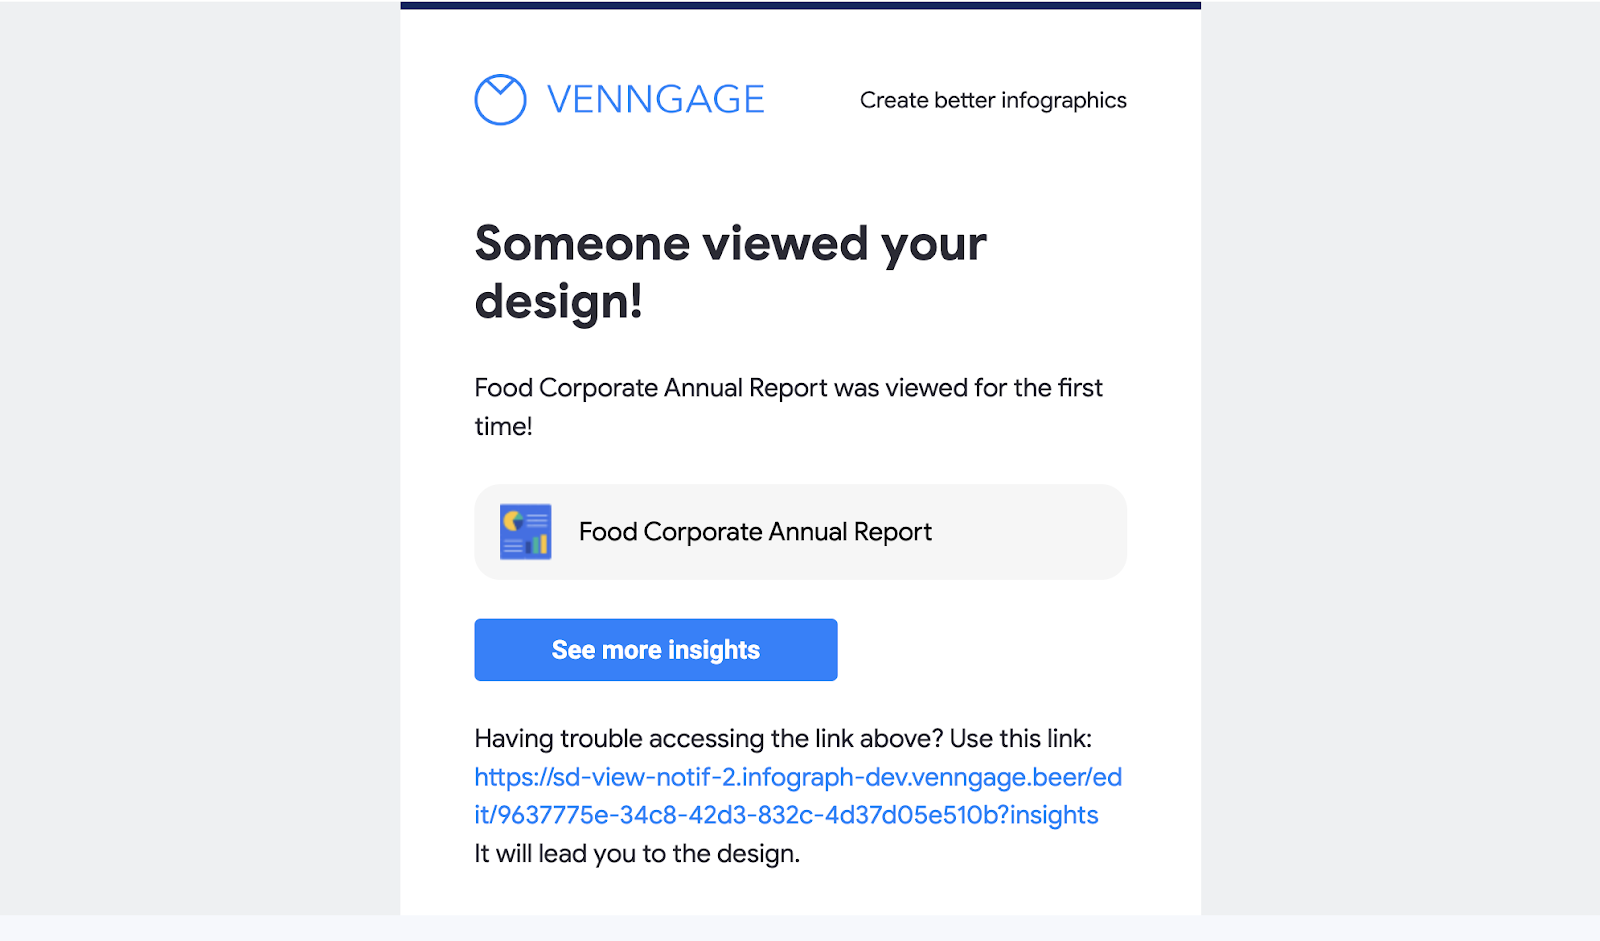 Email with the Venngage logo in the header, titled 